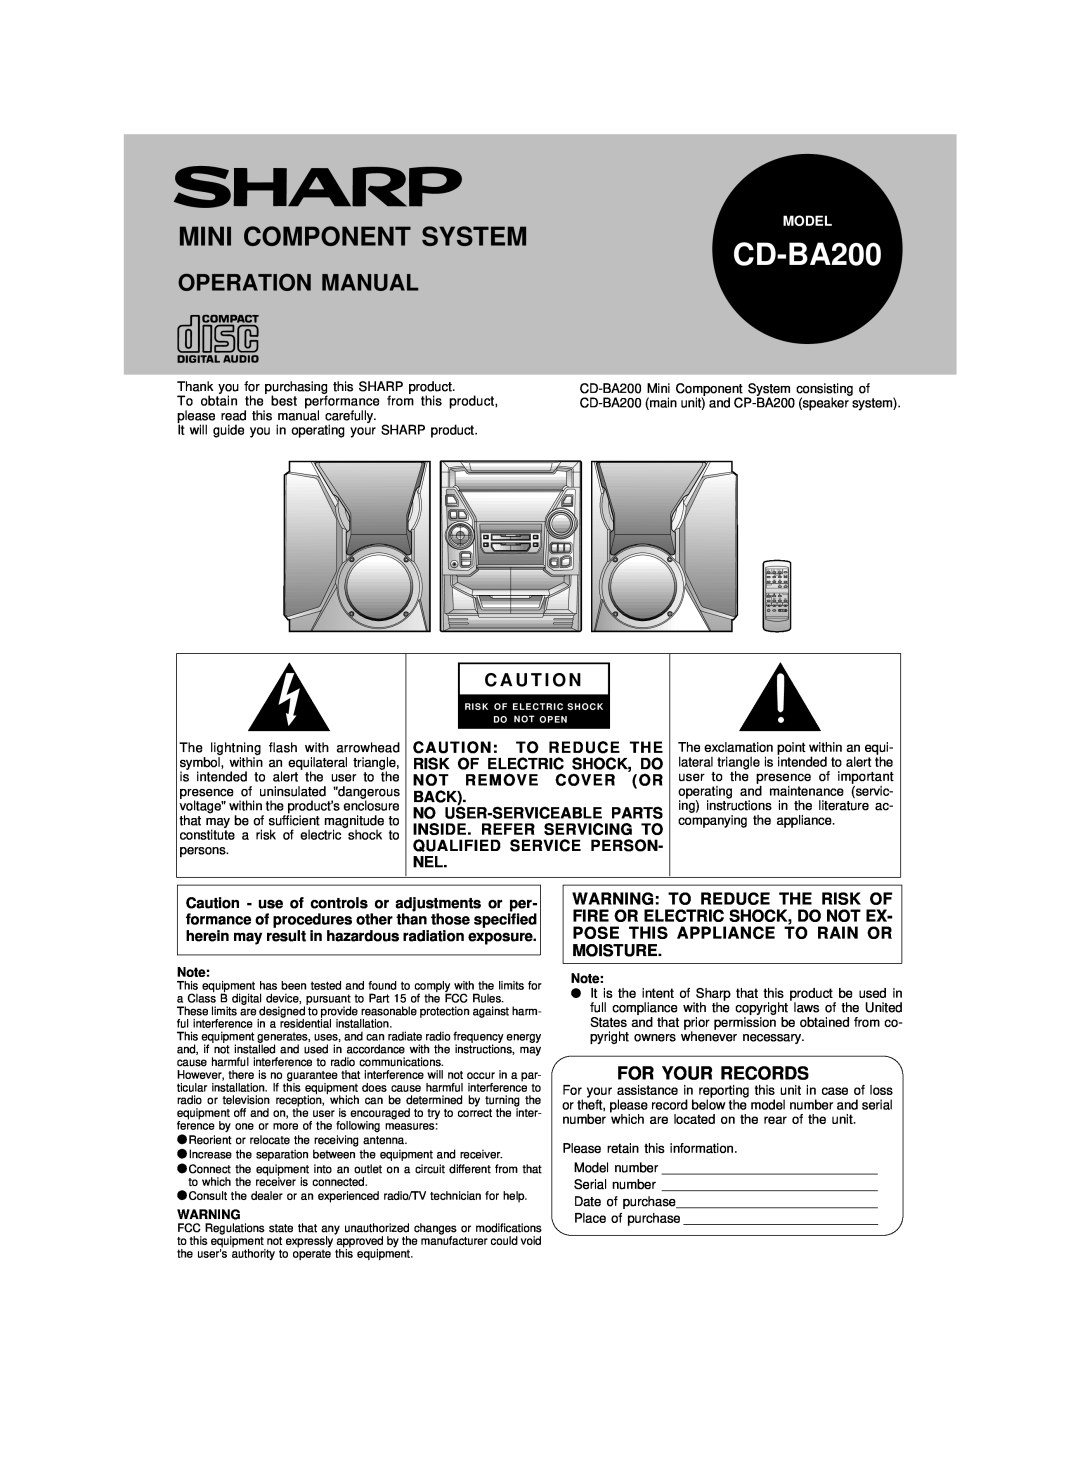 Sharp CD-BA200 operation manual Caution To Reduce The, Risk Of Electric Shock, Do, Not Remove Cover Or, Back, Model 